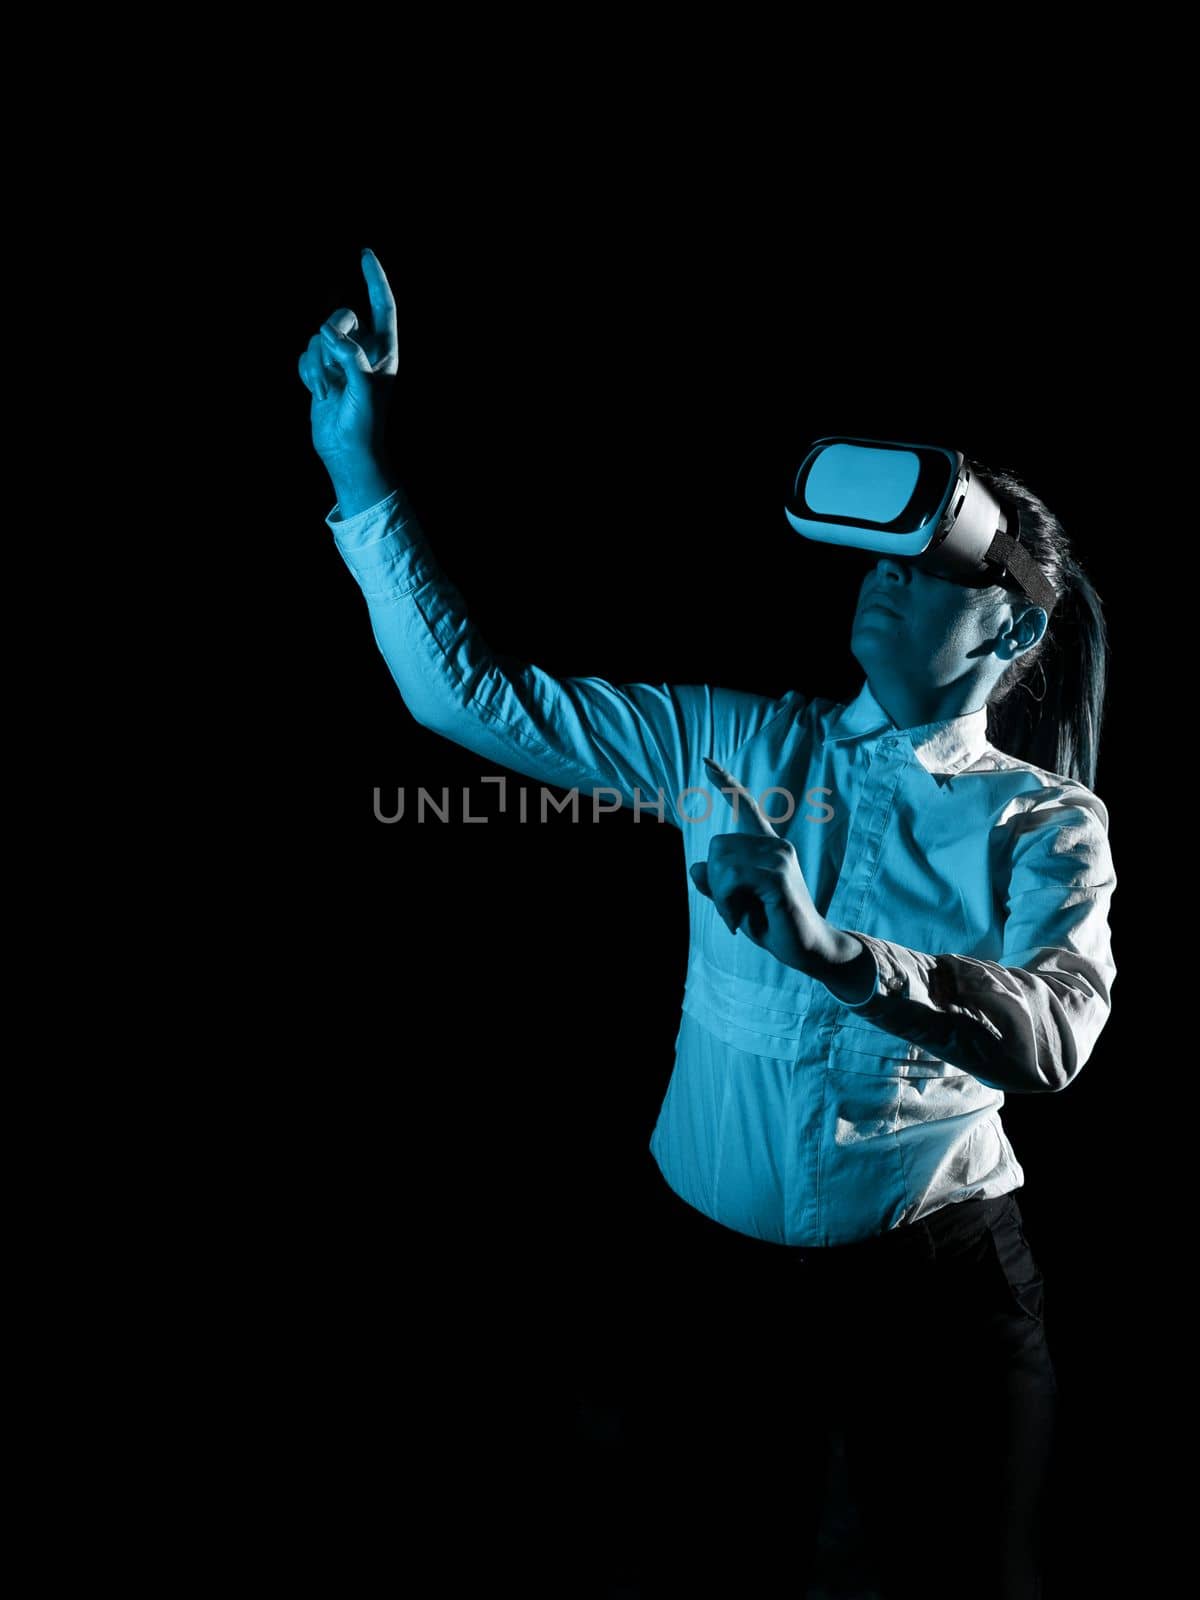 Woman Wearing Vr Glasses And Pointing On Messages With One Finger.